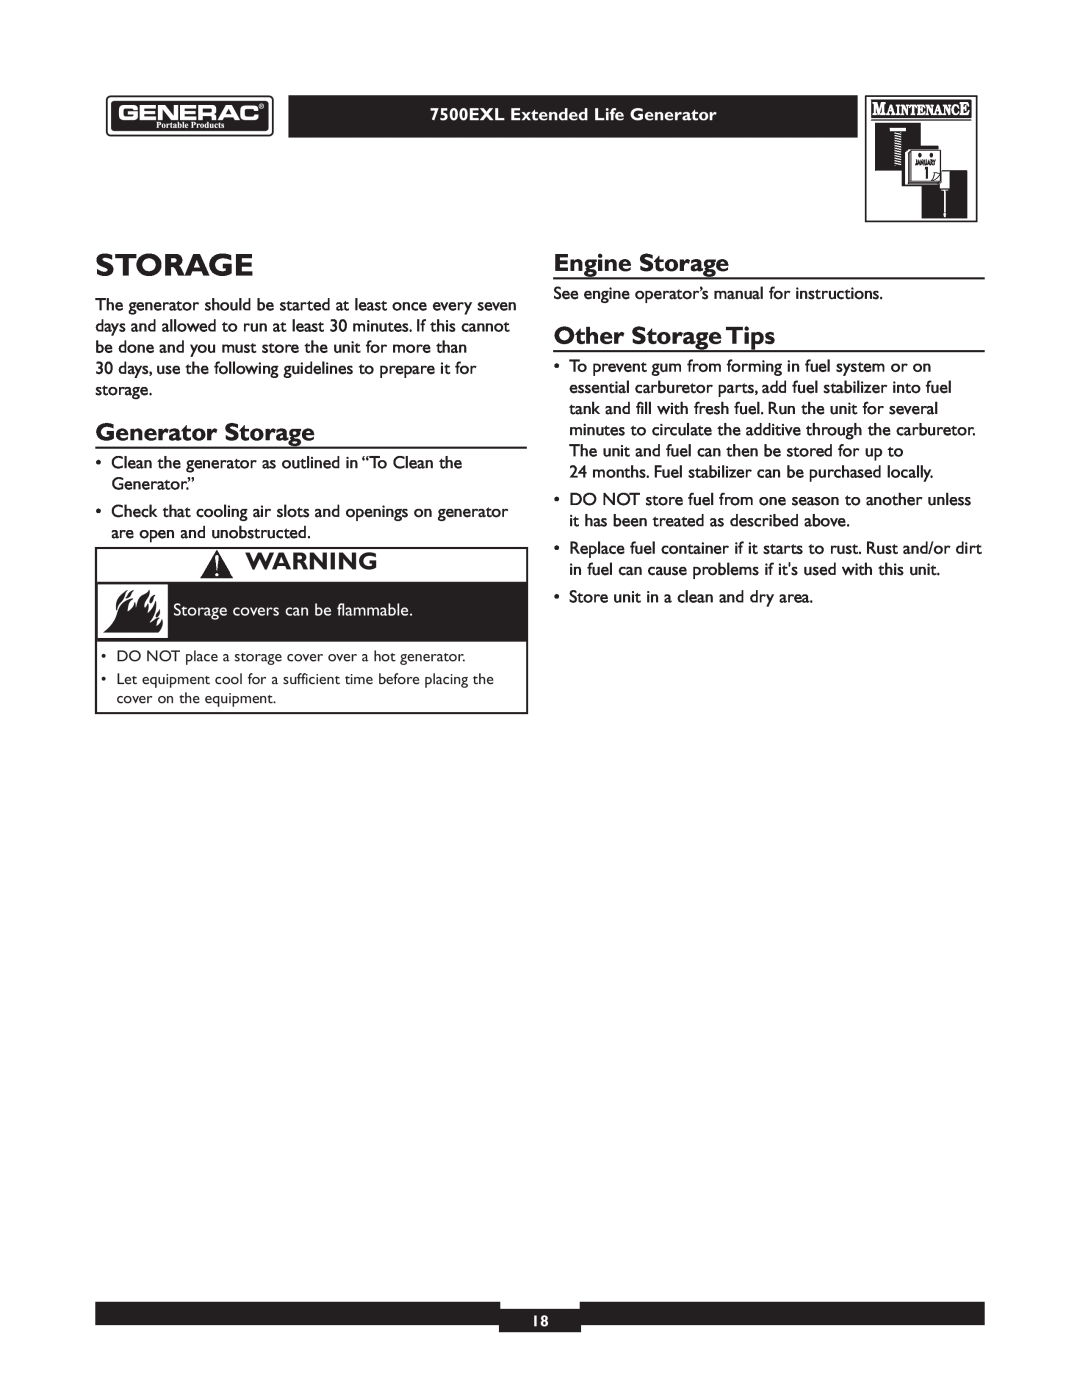 Generac 101 9-3 Generator Storage, Engine Storage, Other Storage Tips, Storage covers can be flammable 